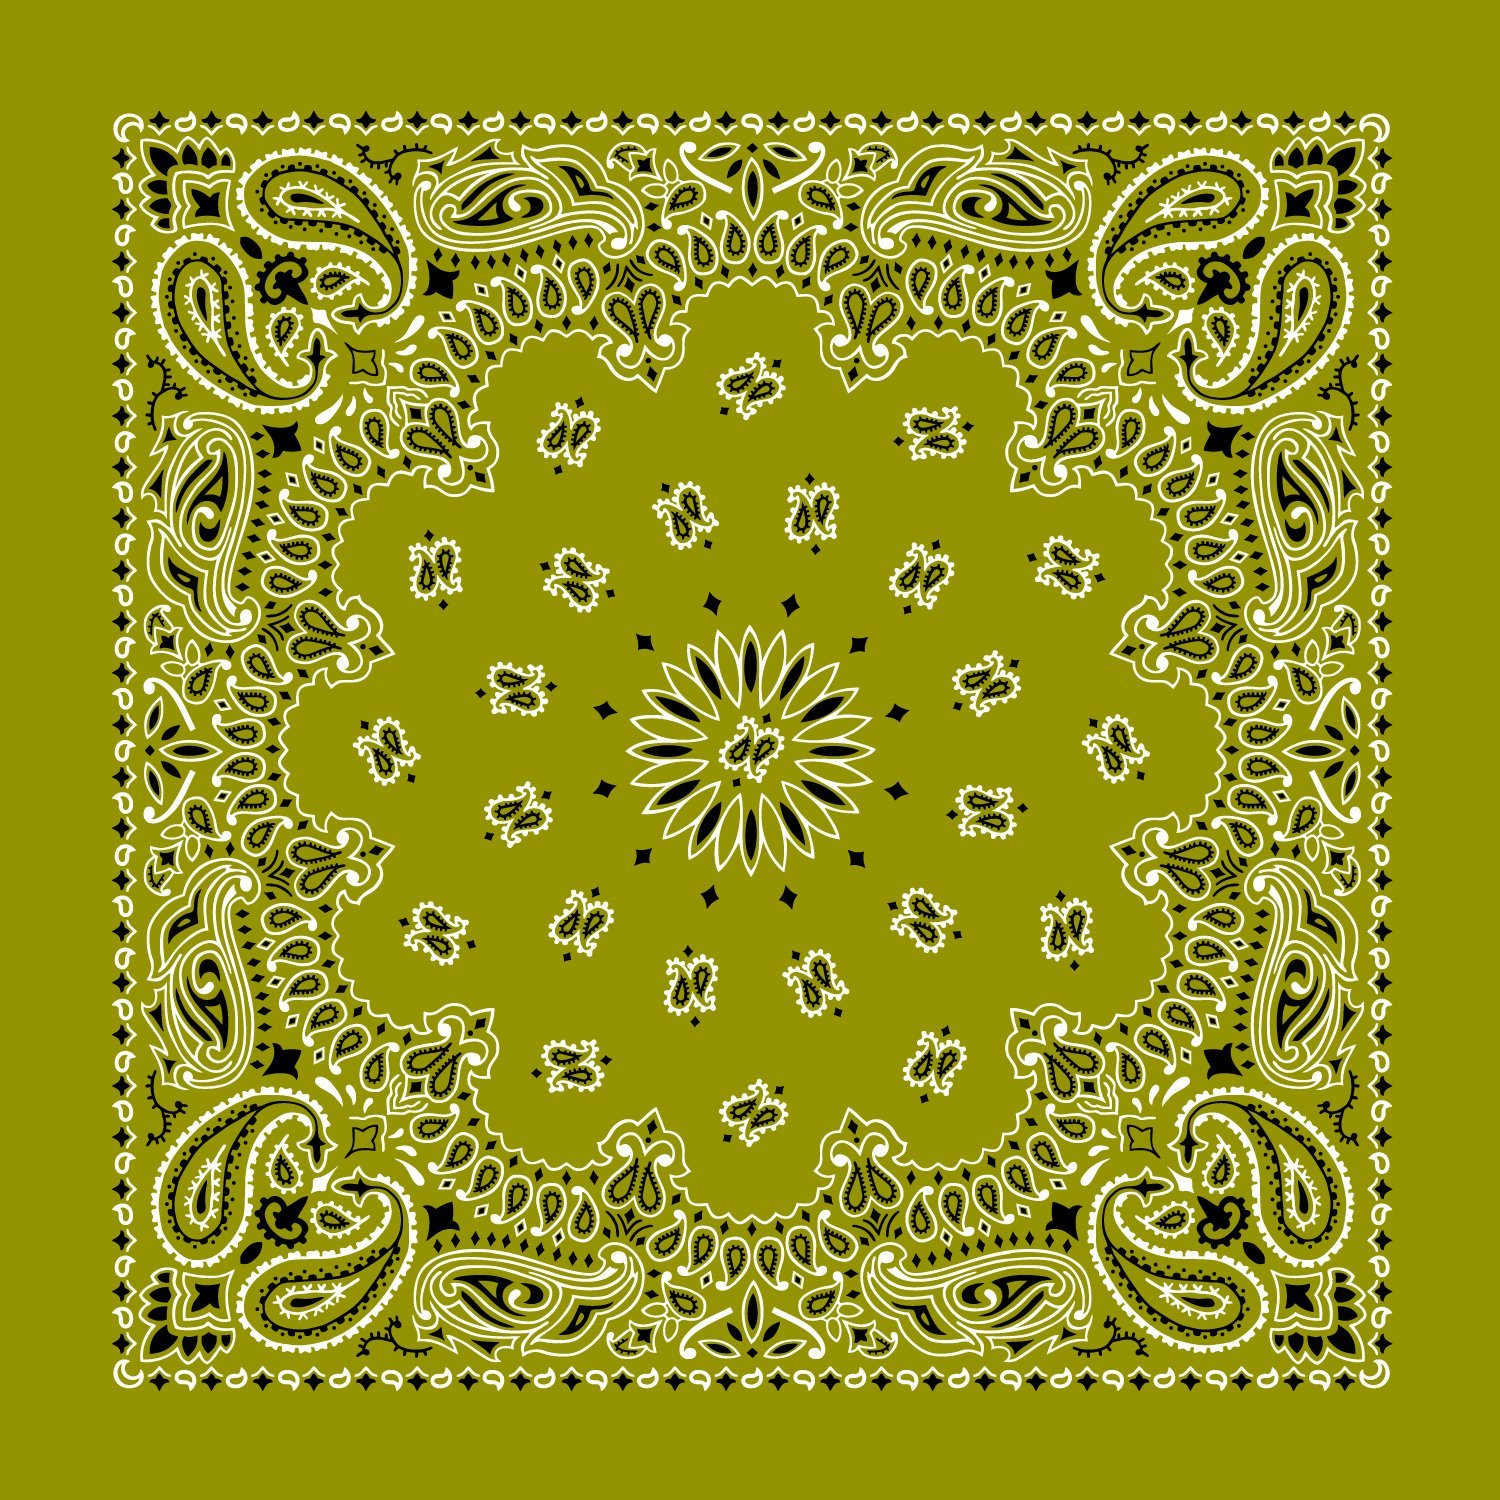 12pcs Olive Green Olive Green Open Center Paisley Bandana - Made in USA 100% Cotton 22